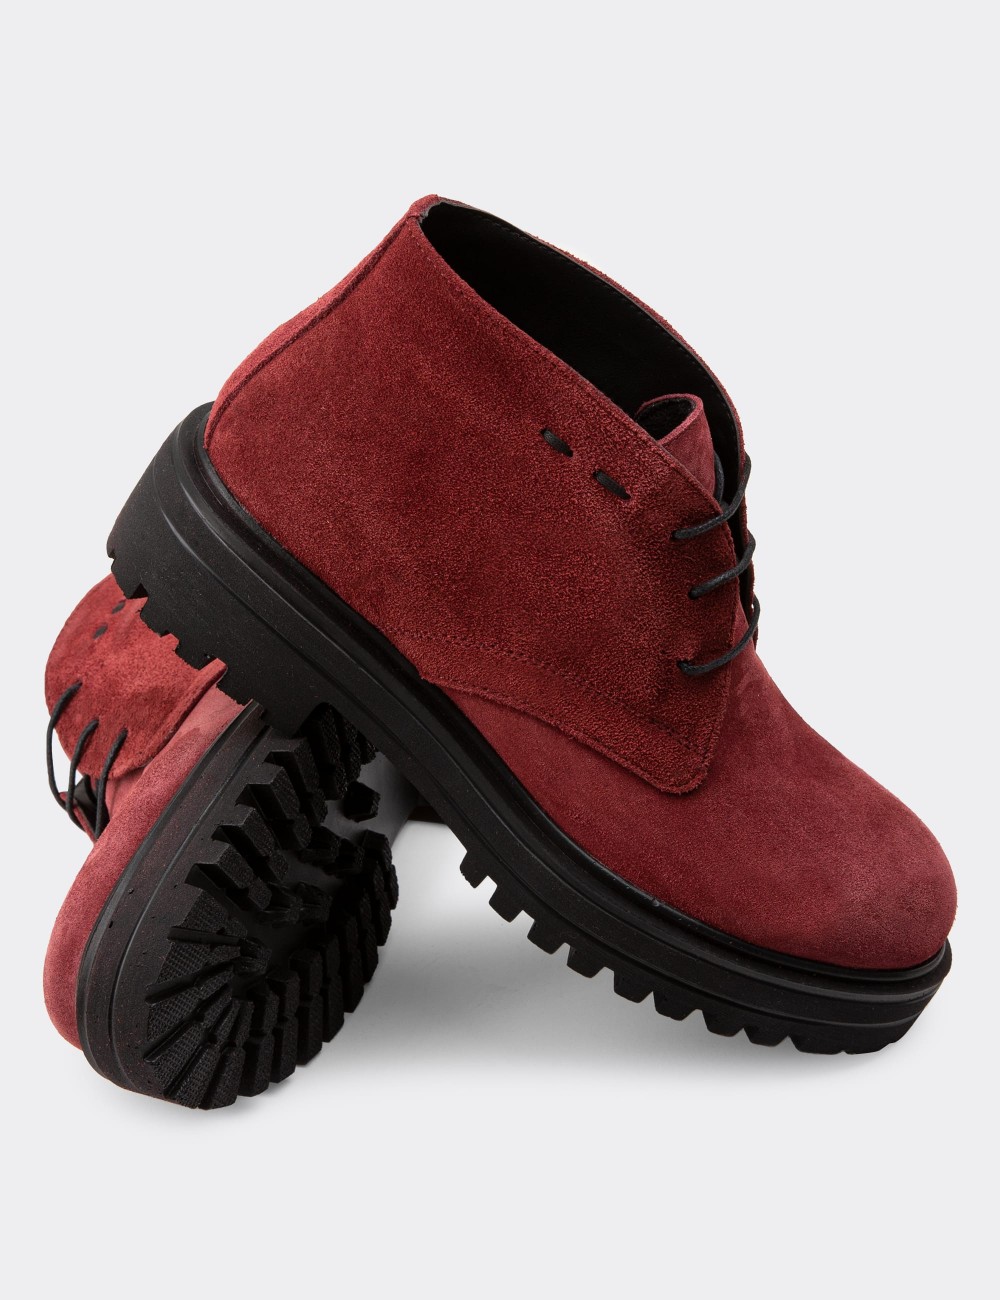 Red Suede Leather Boots - 01847ZKRME02